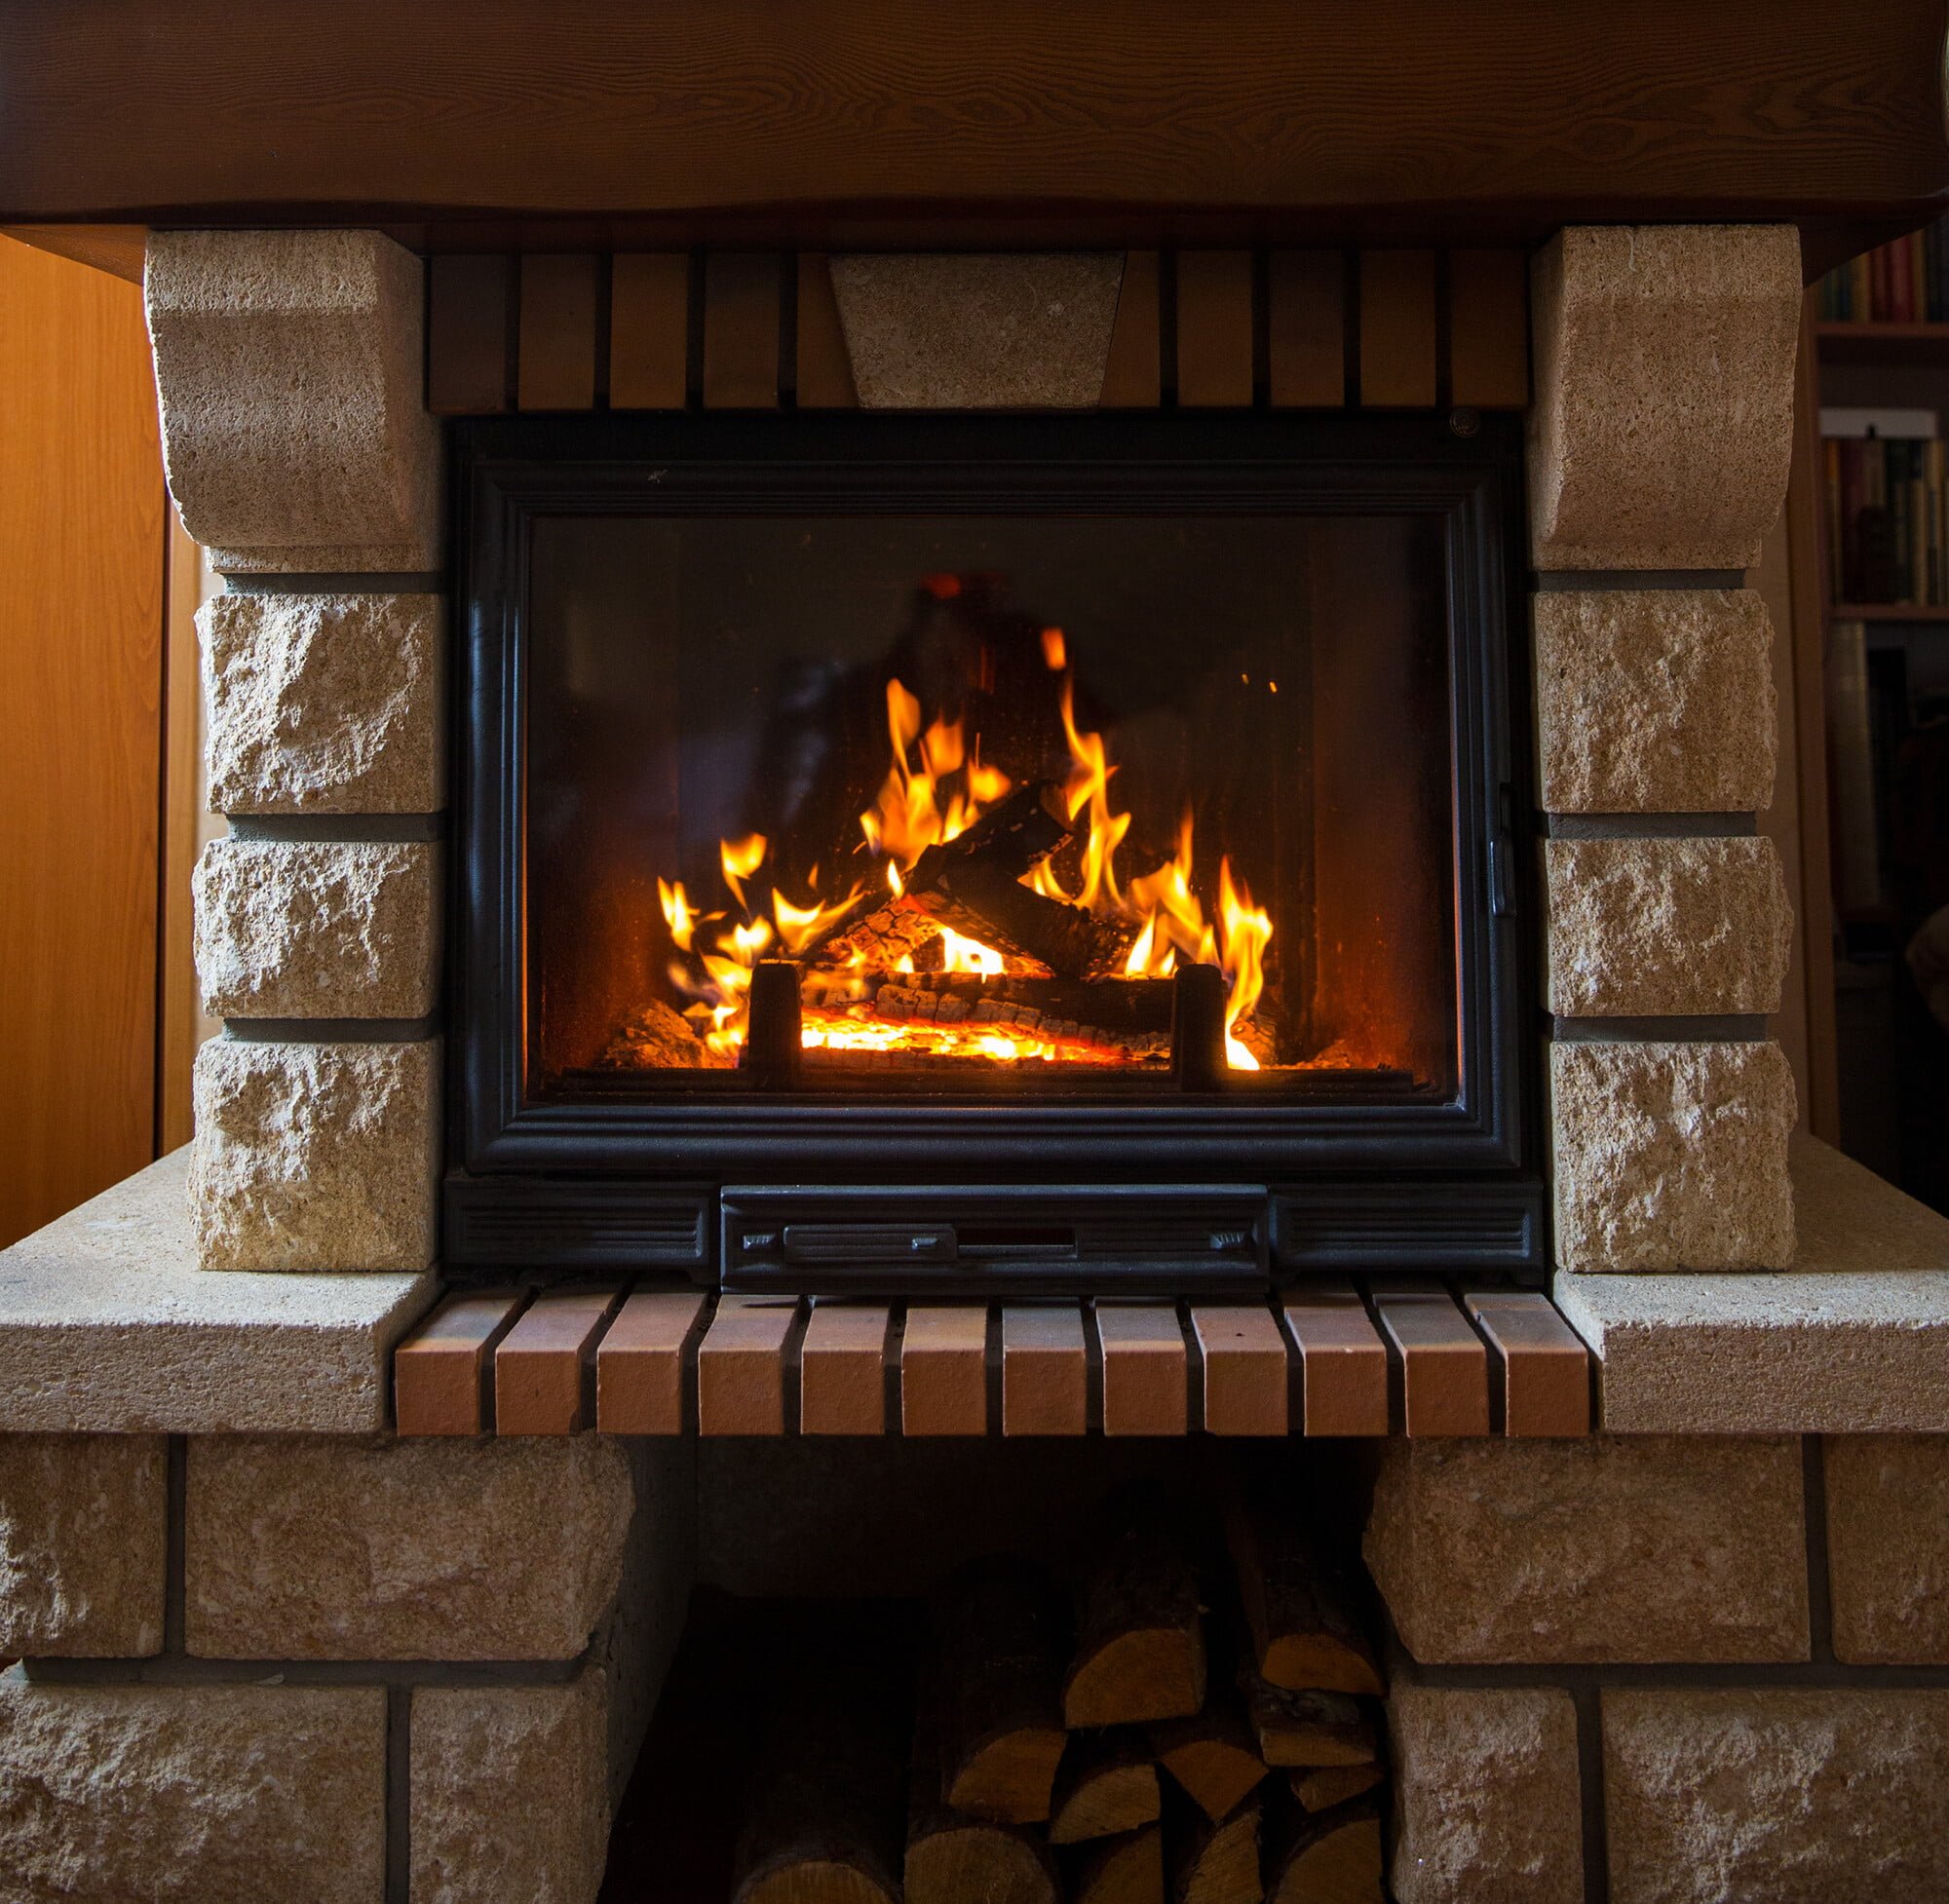 Are you thinking about installing a fireplace at home? Here are a few key benefits of having a fireplace at home that you should know about.